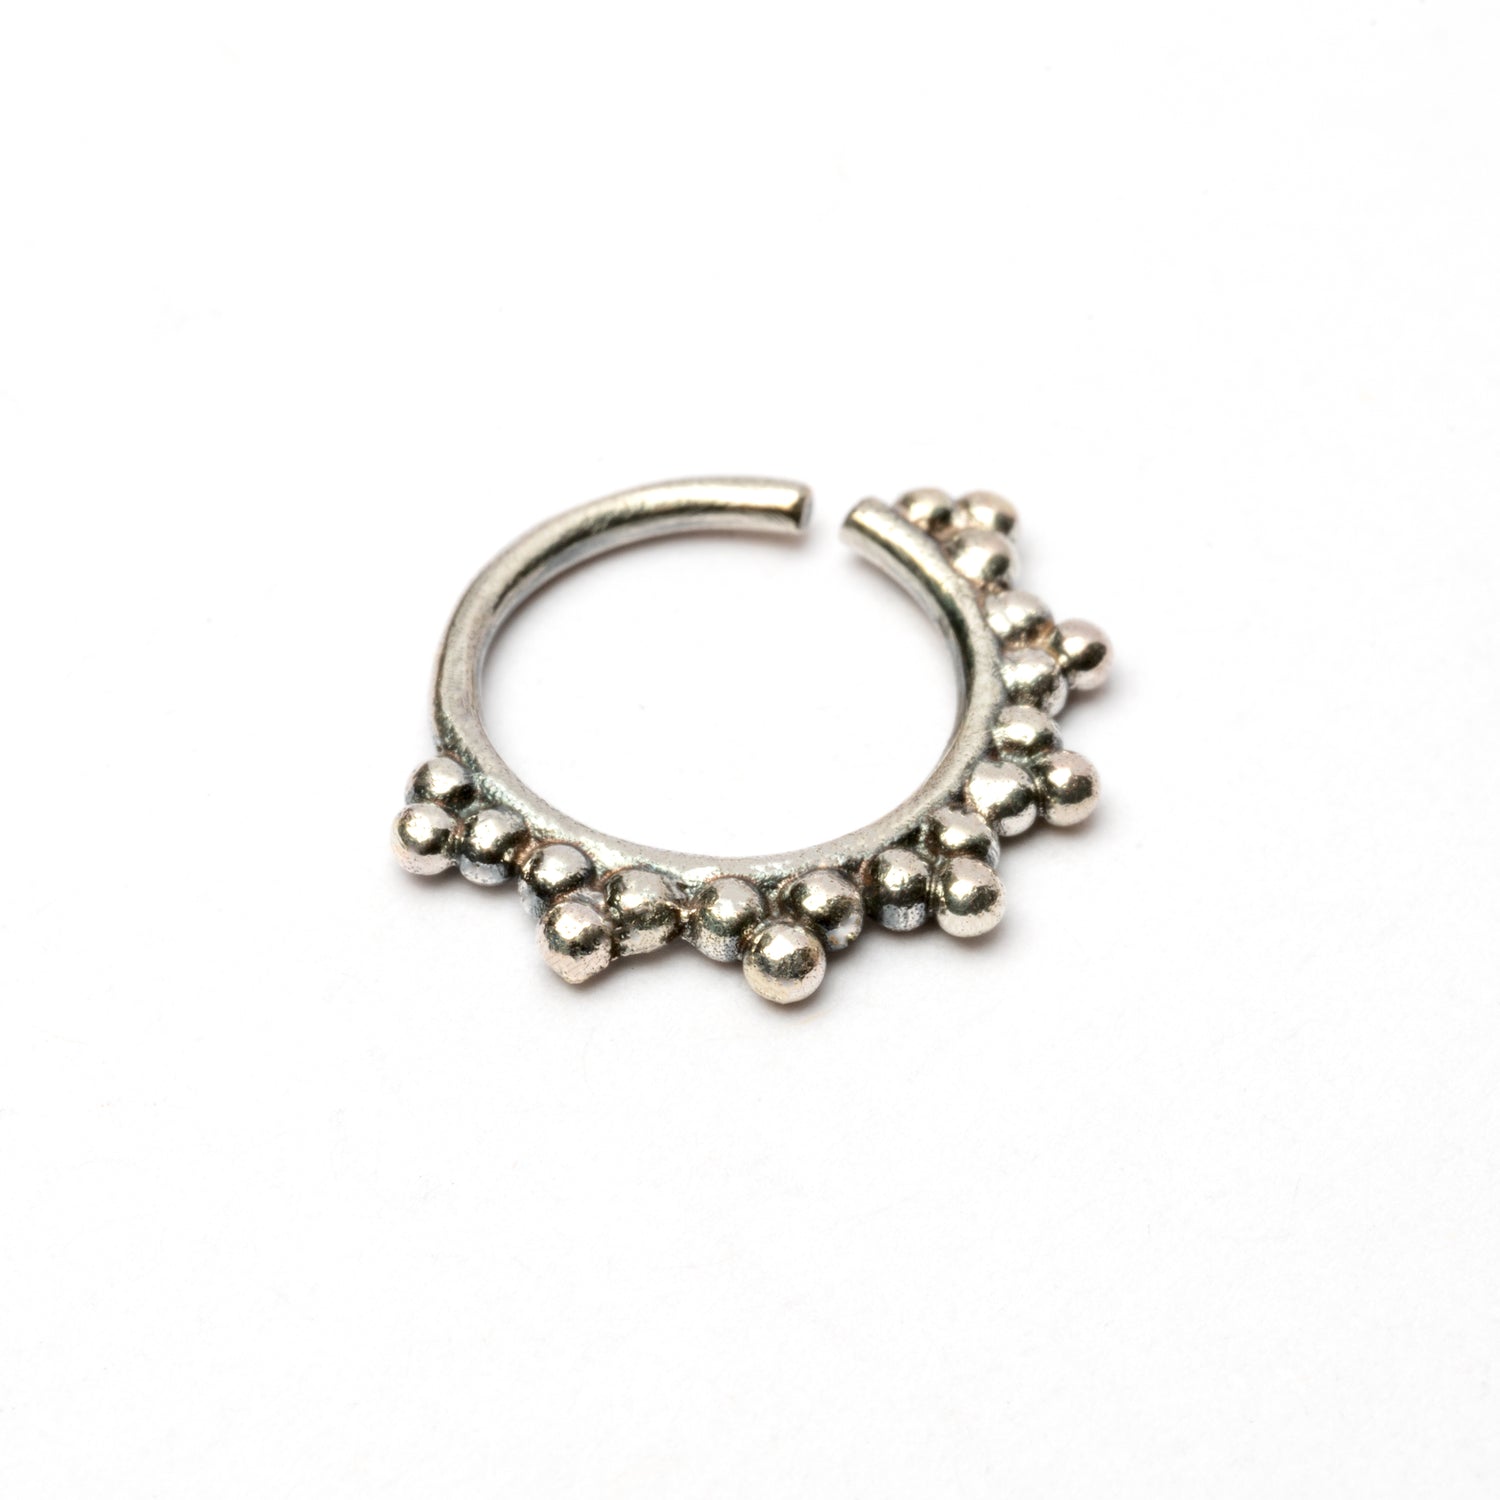 Amalur Indian style silver septum ring right side view